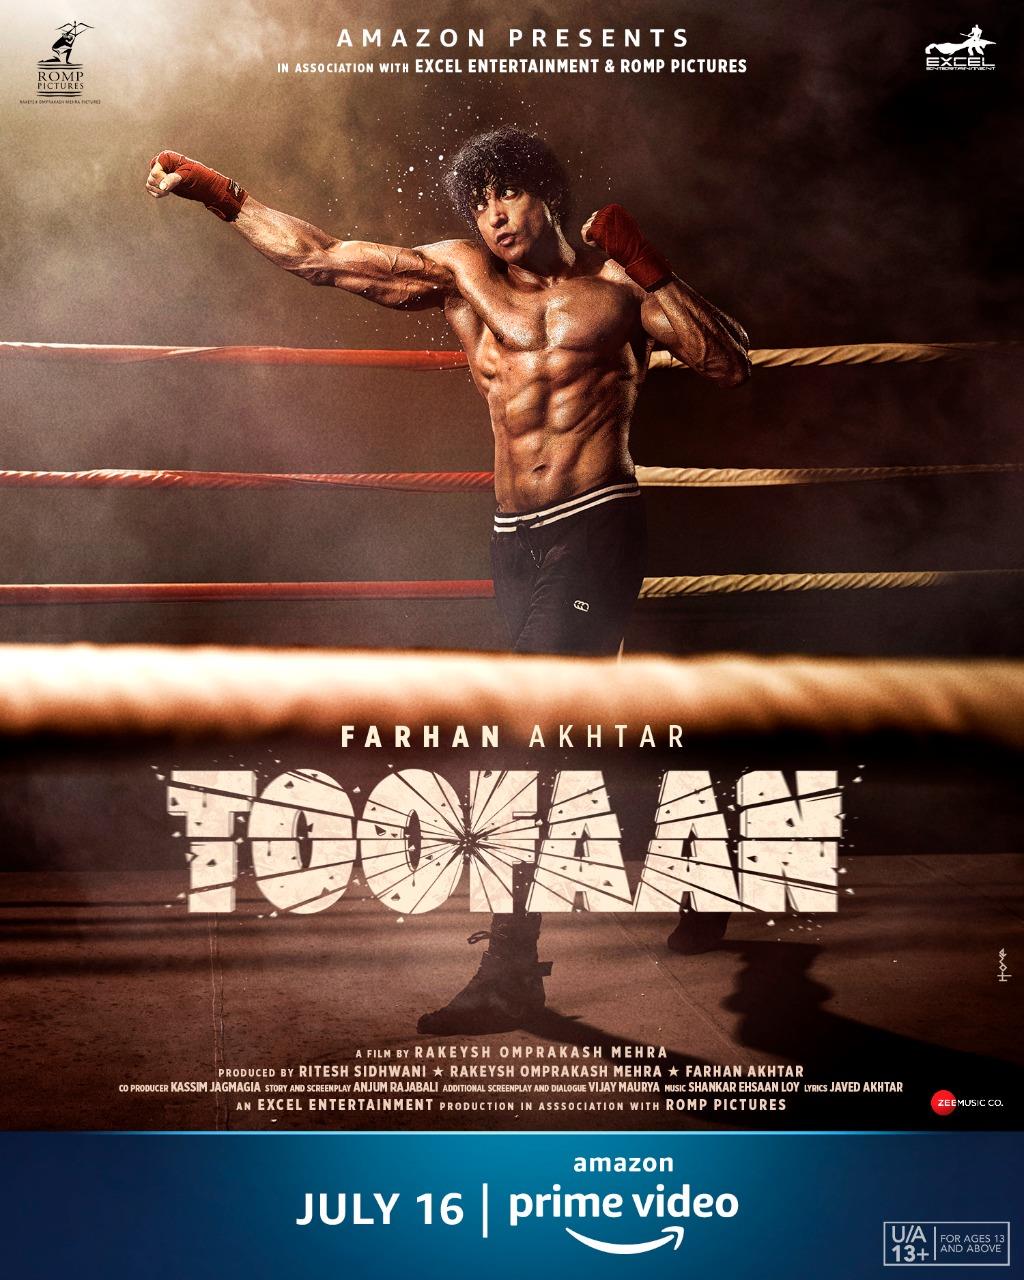 Farhan Akhtar's 'Toofaan' to release on Amazon Prime Video in July